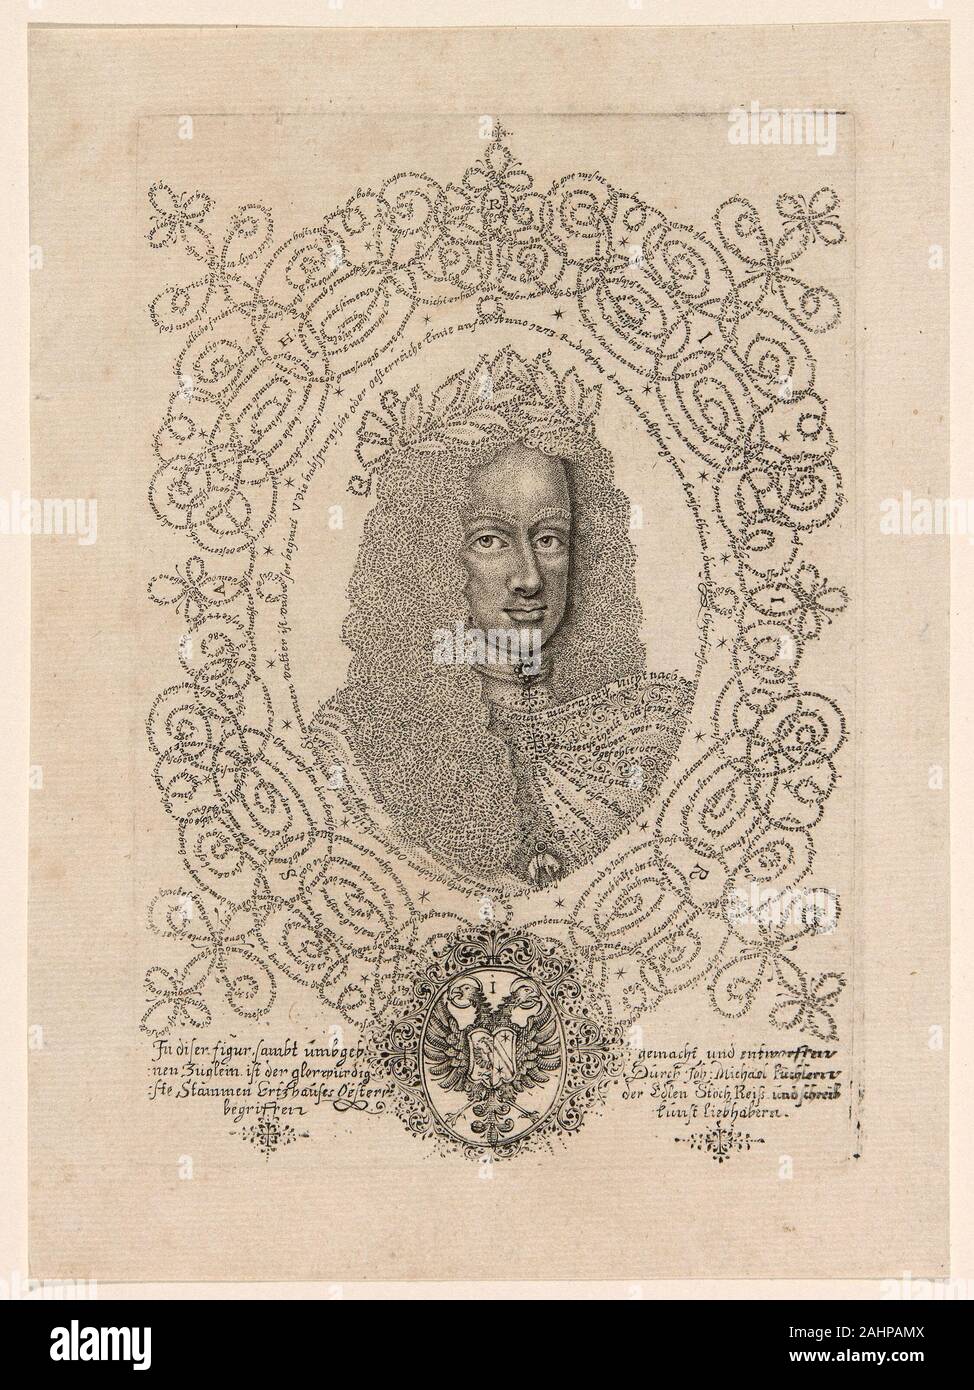 Johann Michael Püchler. Joseph I (August), Holy Roman Emperor. 1700–1710. Germany. Engraving in black on ivory laid paper The technique of micrography, in which artists use microscopic script to realize abstract designs or figurative representations, traces its origins to Islamic and Judaic traditions of image-making with minute letter forms. In the early 18th century Germany artists such as Johann Michael Püchler and Matthias Buchinger also practiced the art form, creating ingenious images that required great dexterity from their creators and sustained scrutiny from their viewers. These two p Stock Photo